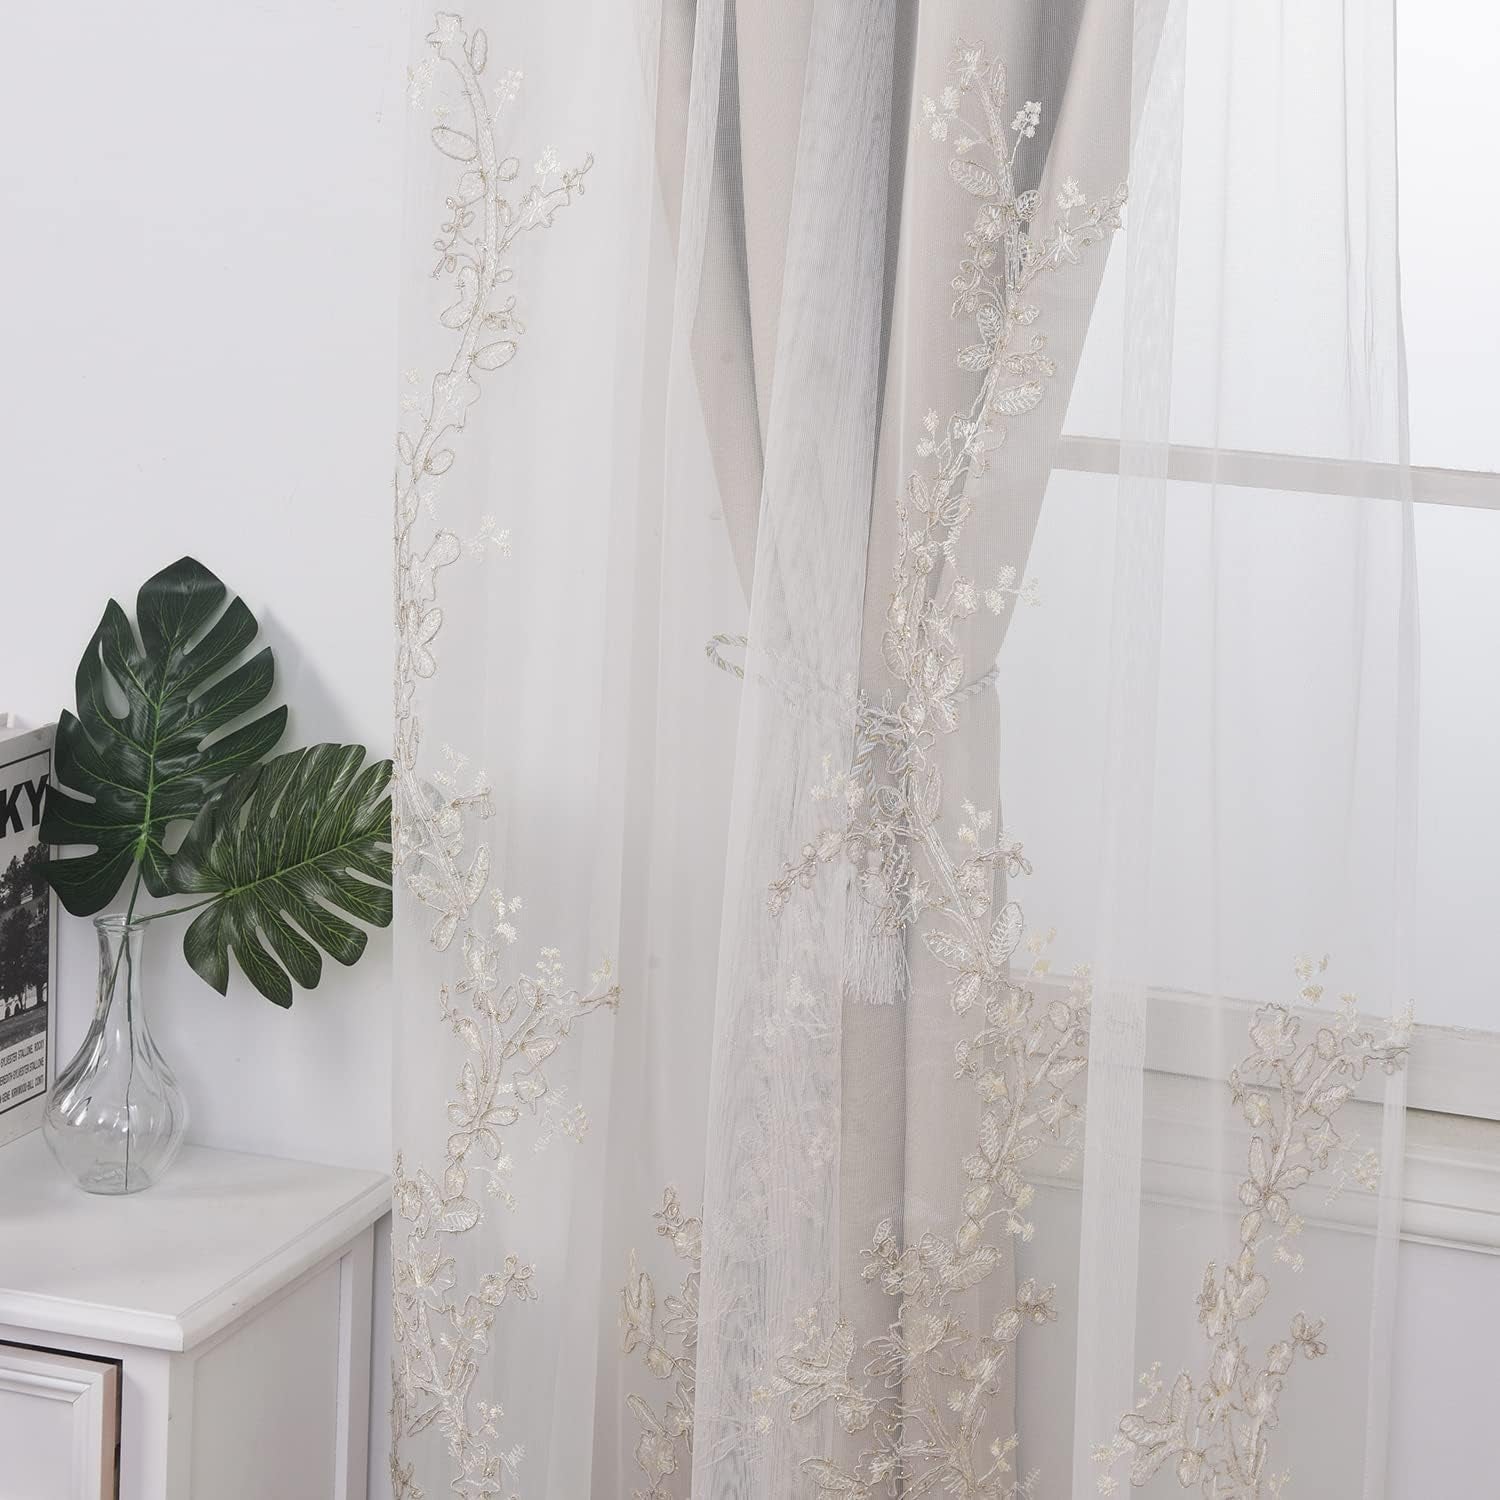 GYROHOME Double Layered Curtains with Embroidered White Sheer Tulle, Mix and Match Curtains Room Darkening Grommet Top Thermal Insulated Drapes,2Panels,52X84Inch,Beige  GYROHOME   